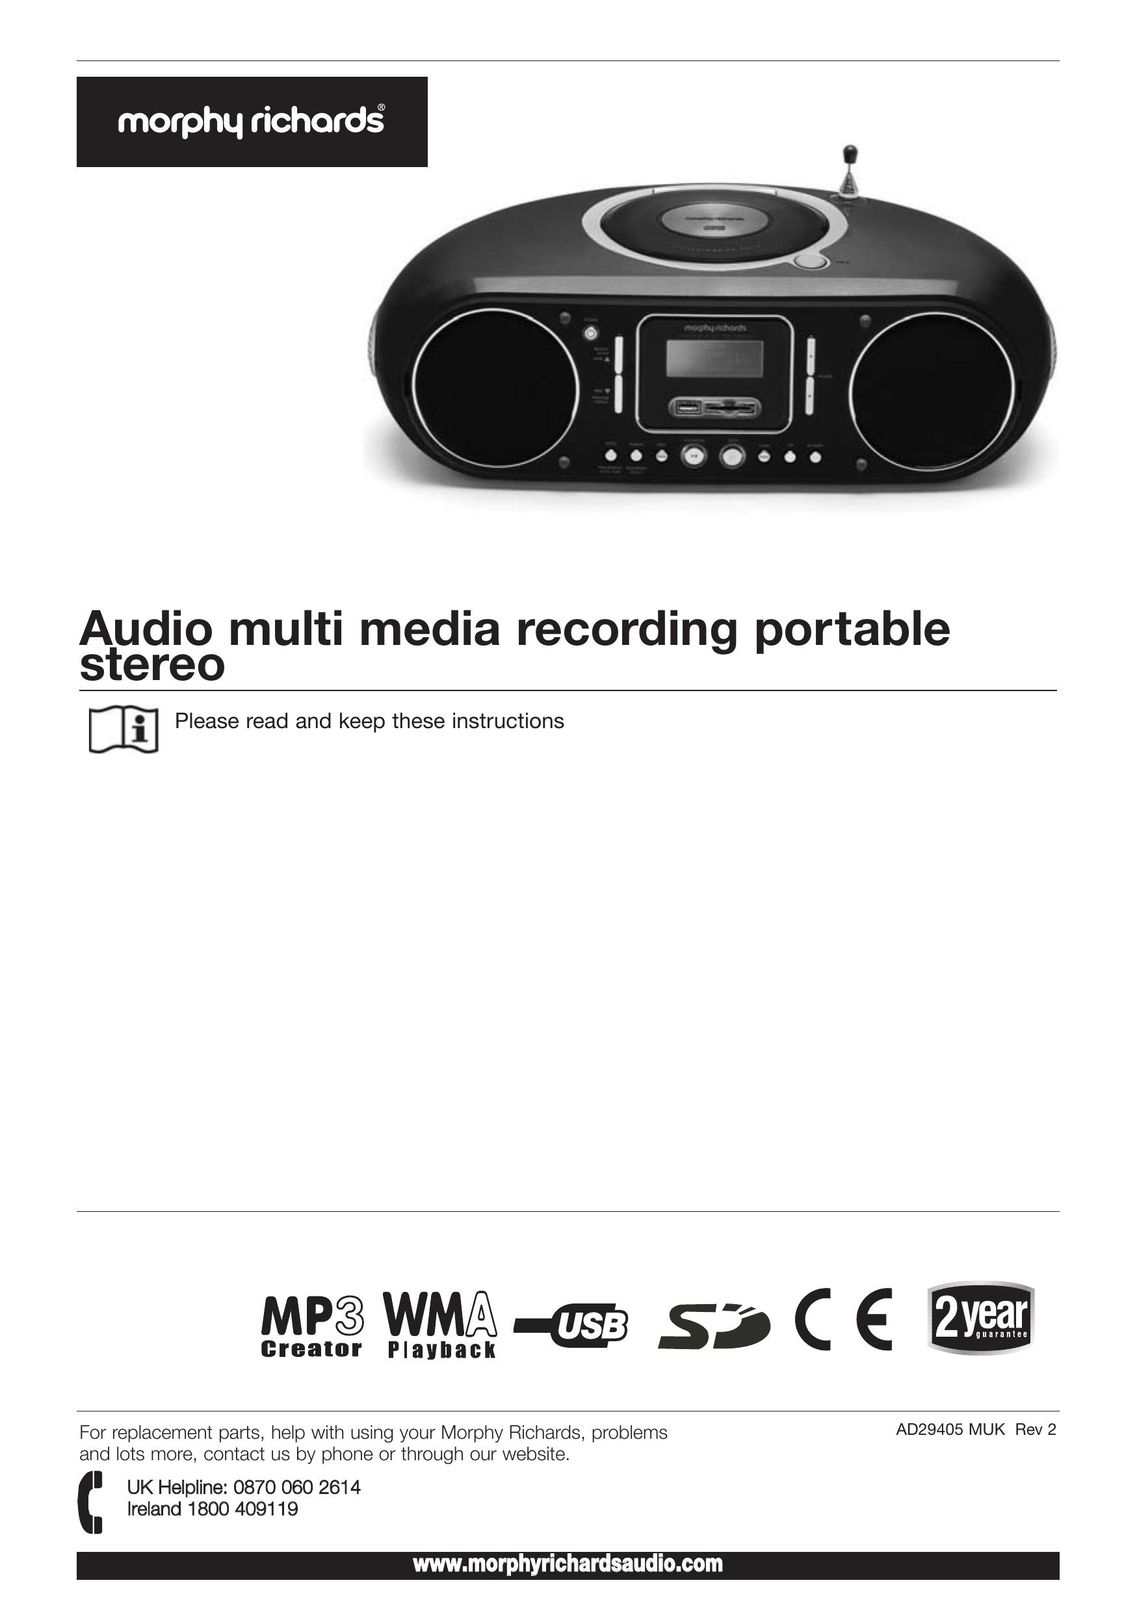 Morphy Richards AD29405 Portable Stereo System User Manual